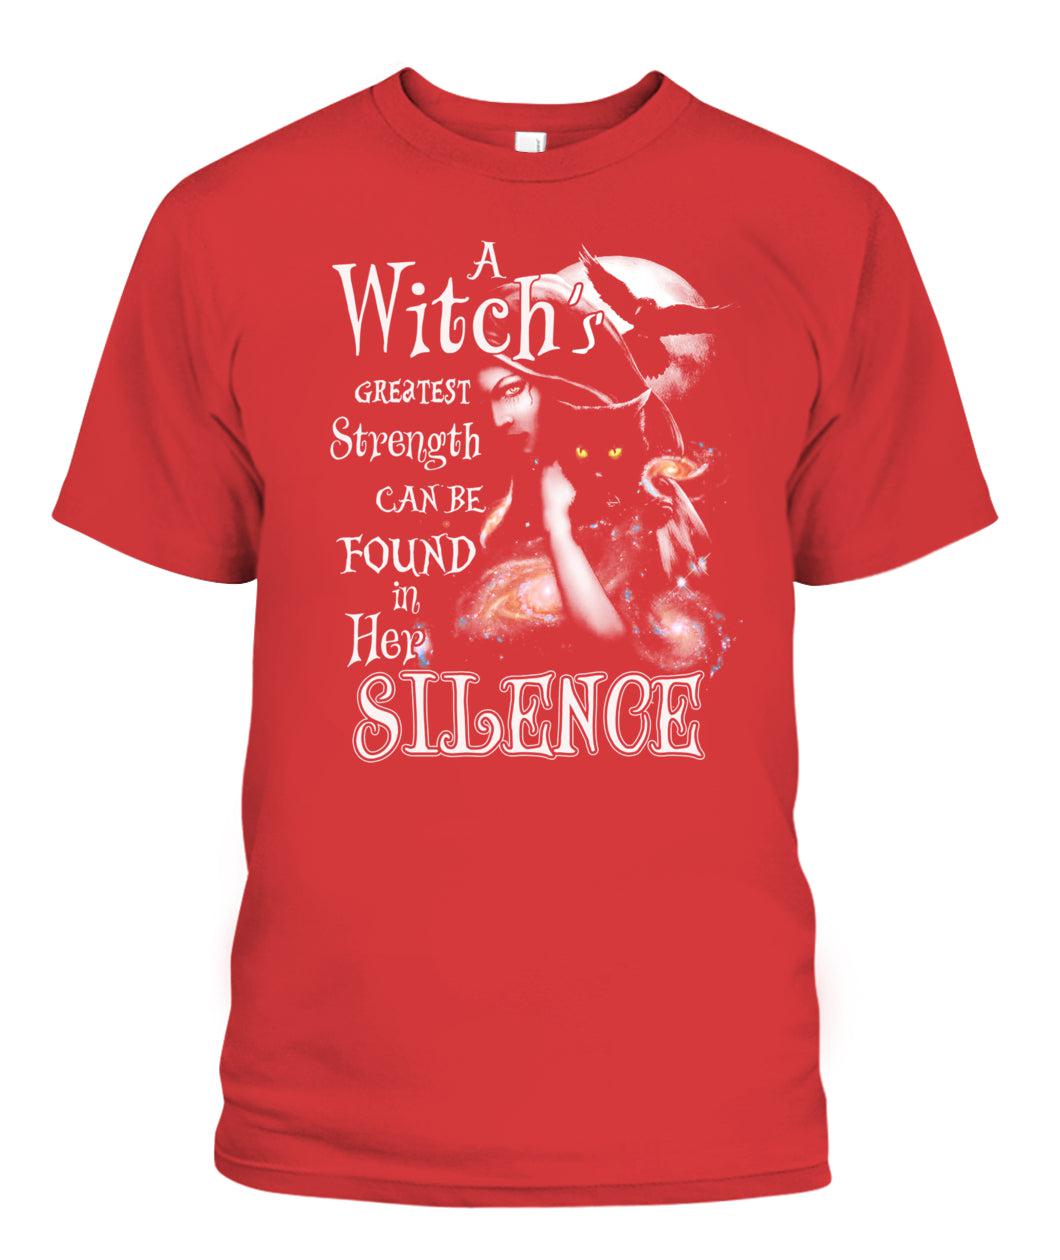 A Witch's greatest strength Tshirt Witchy Tee-MoonChildWorld